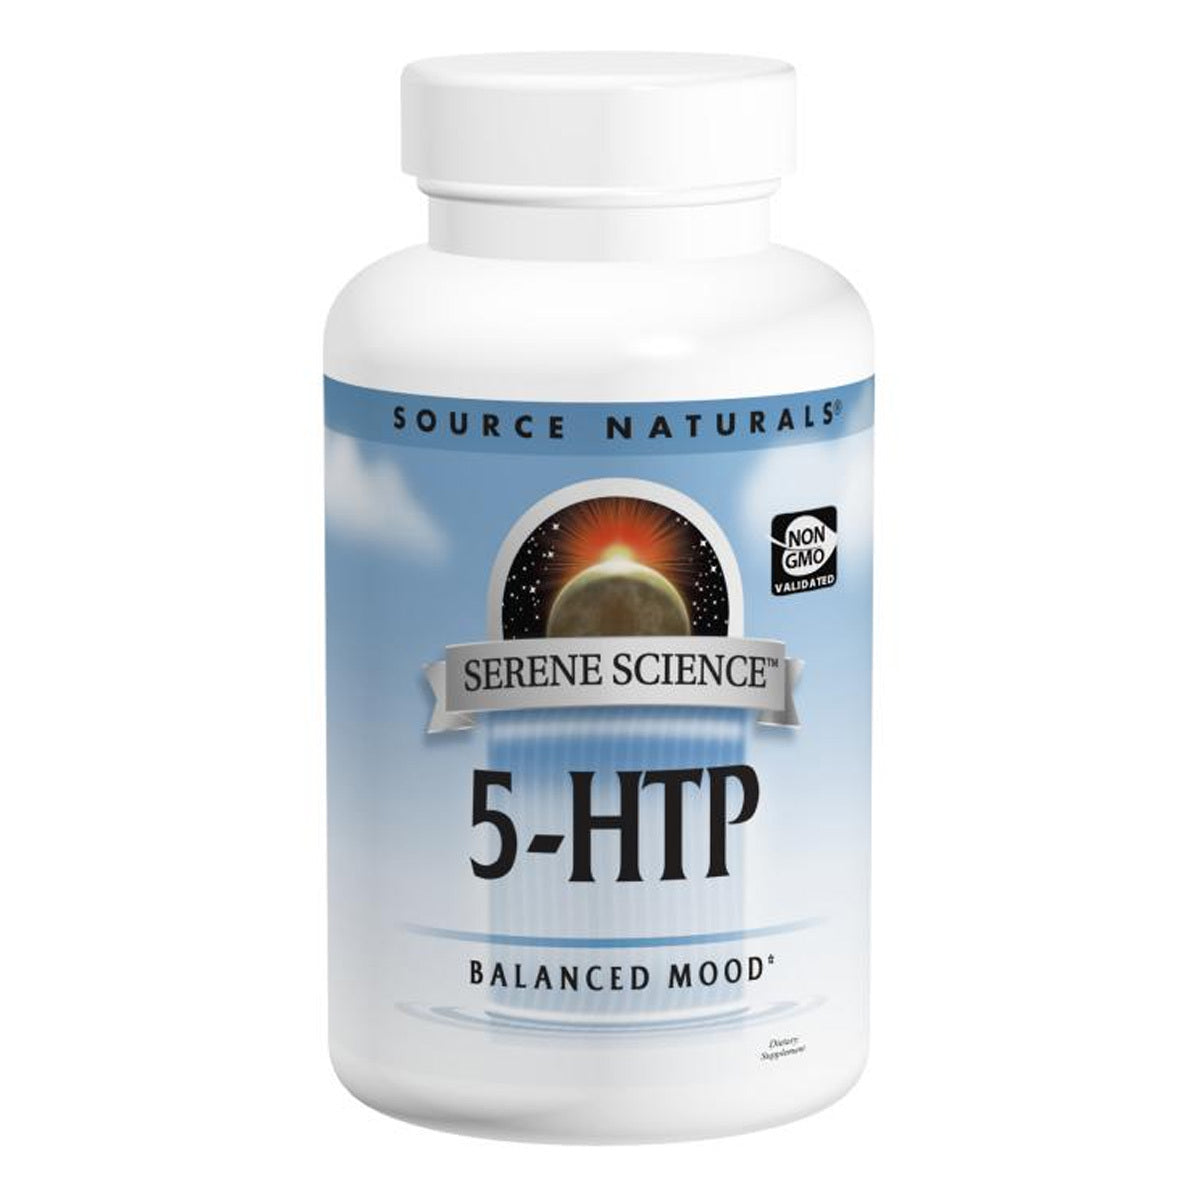 Primary image of Serene Science 5-HTP 50mg